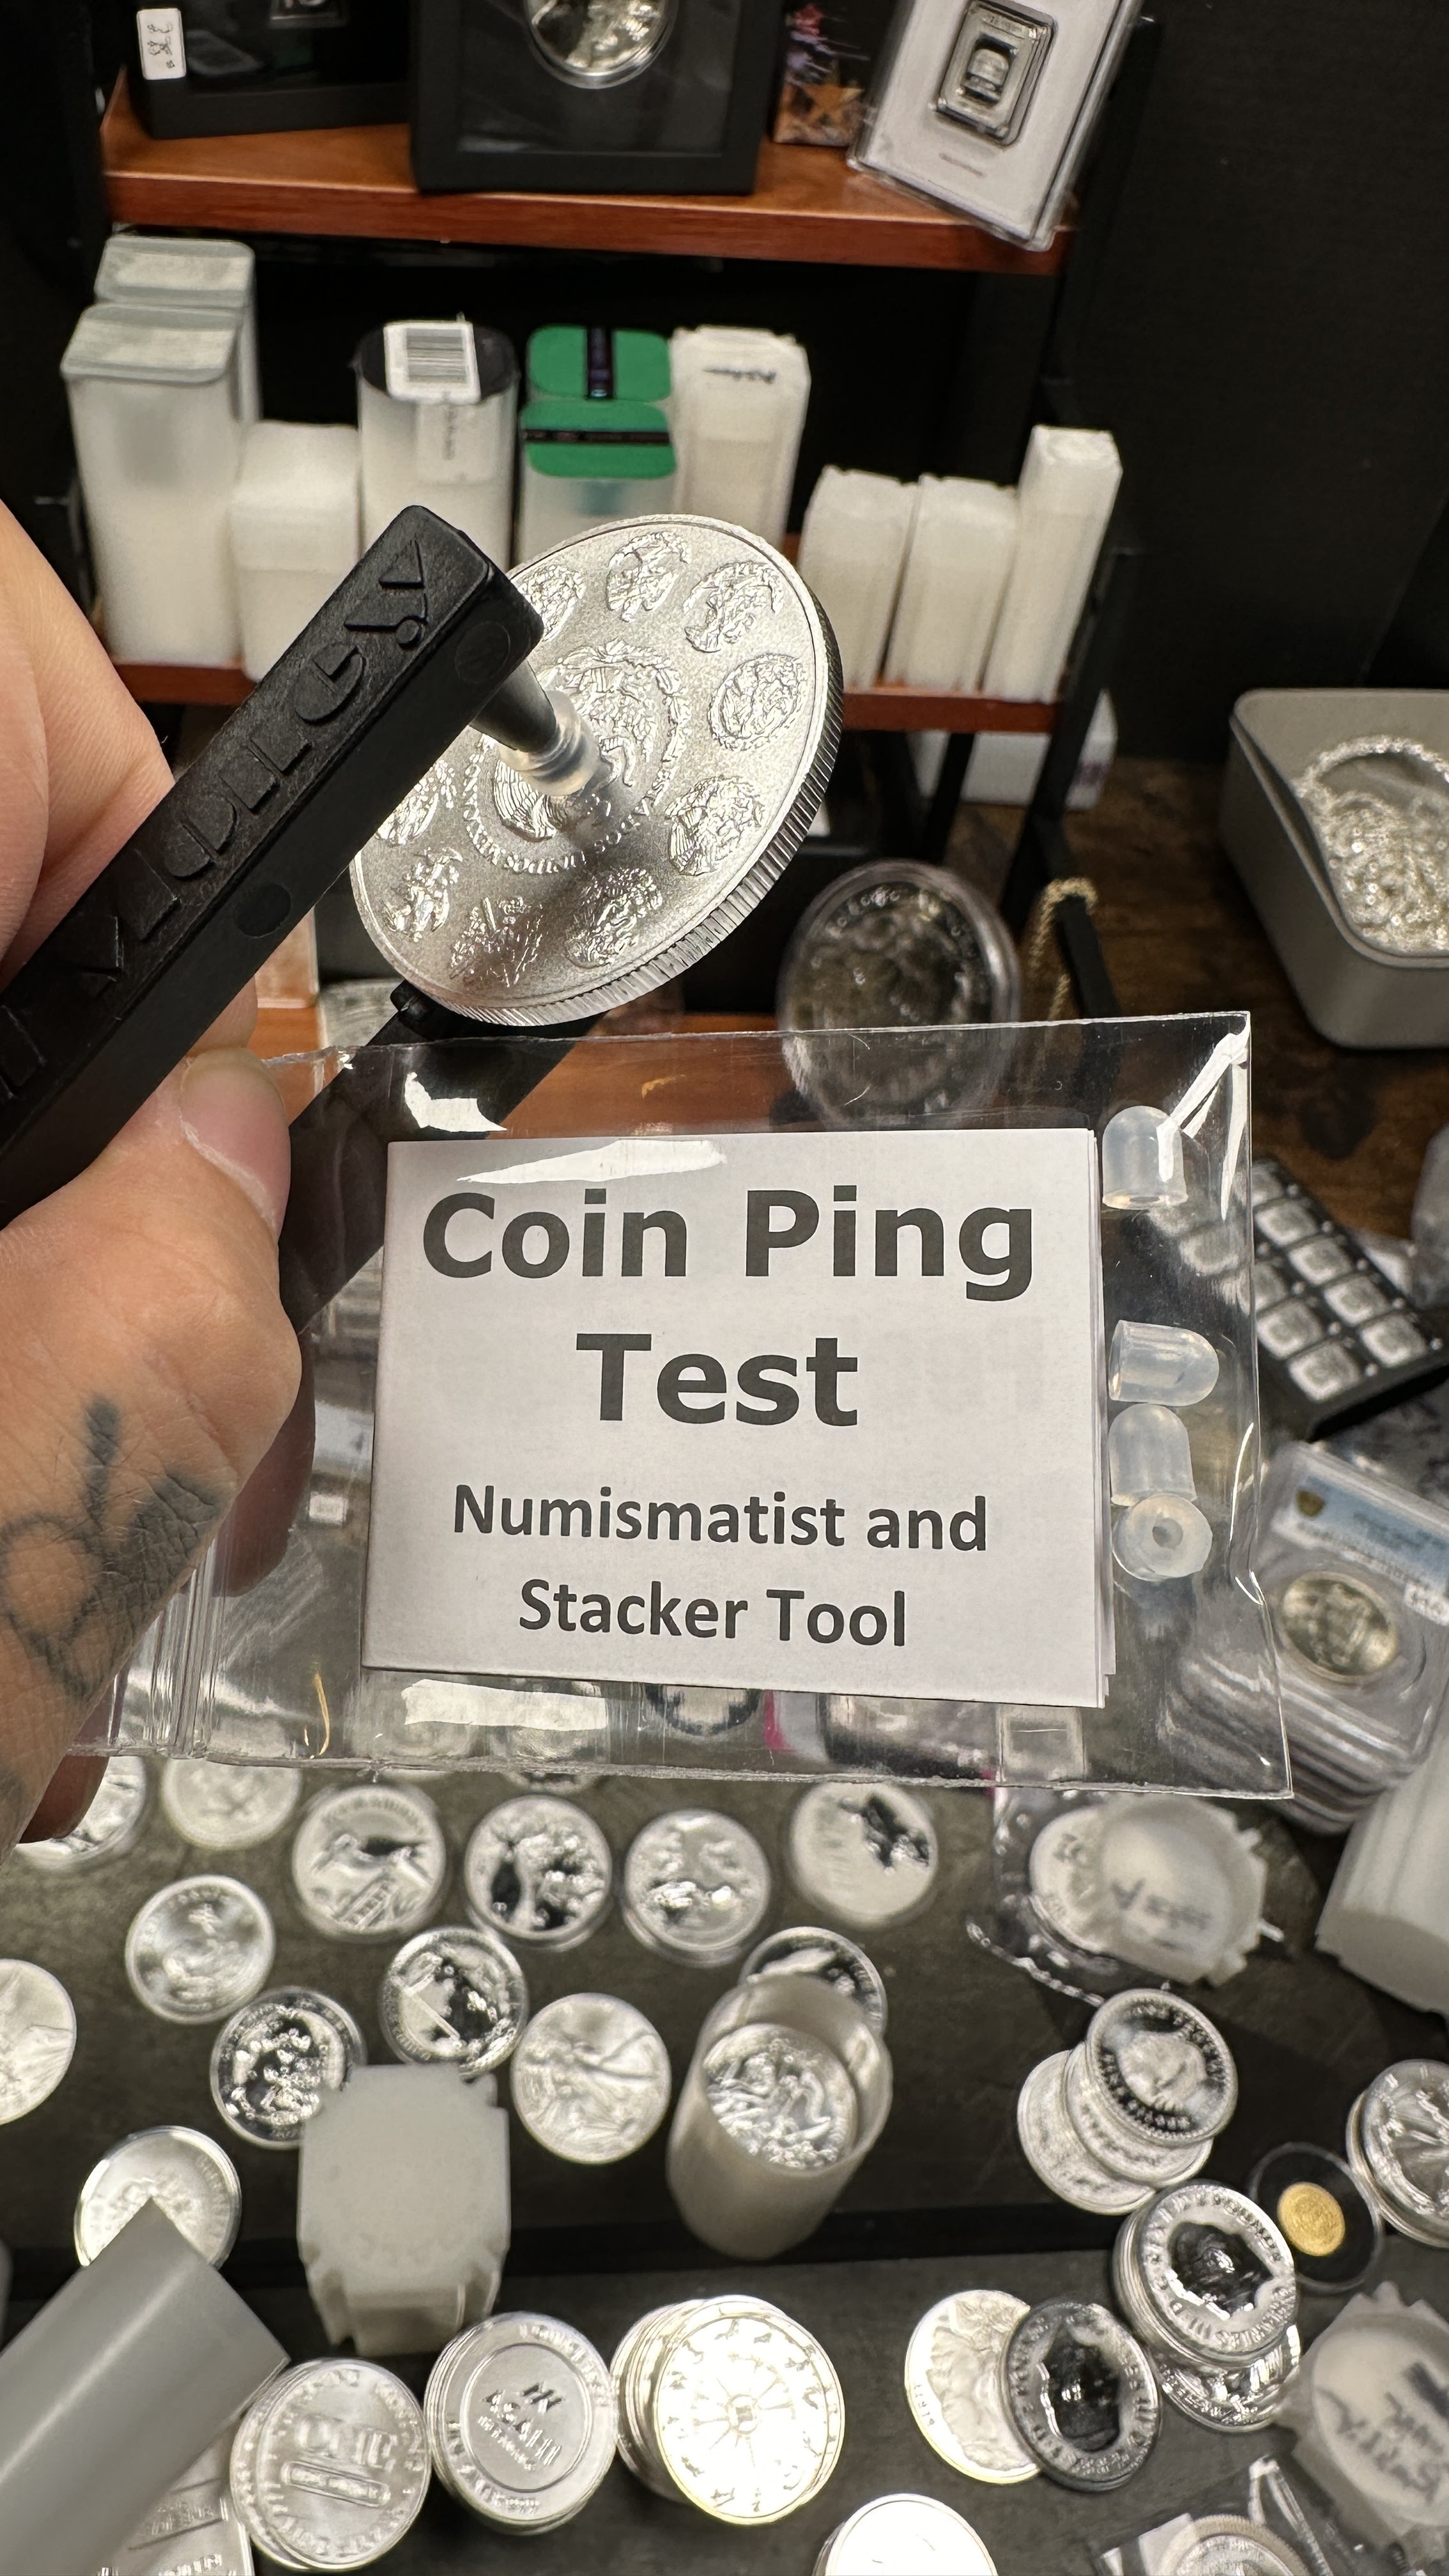 The Pocket Pinger - Coin Ping Tester